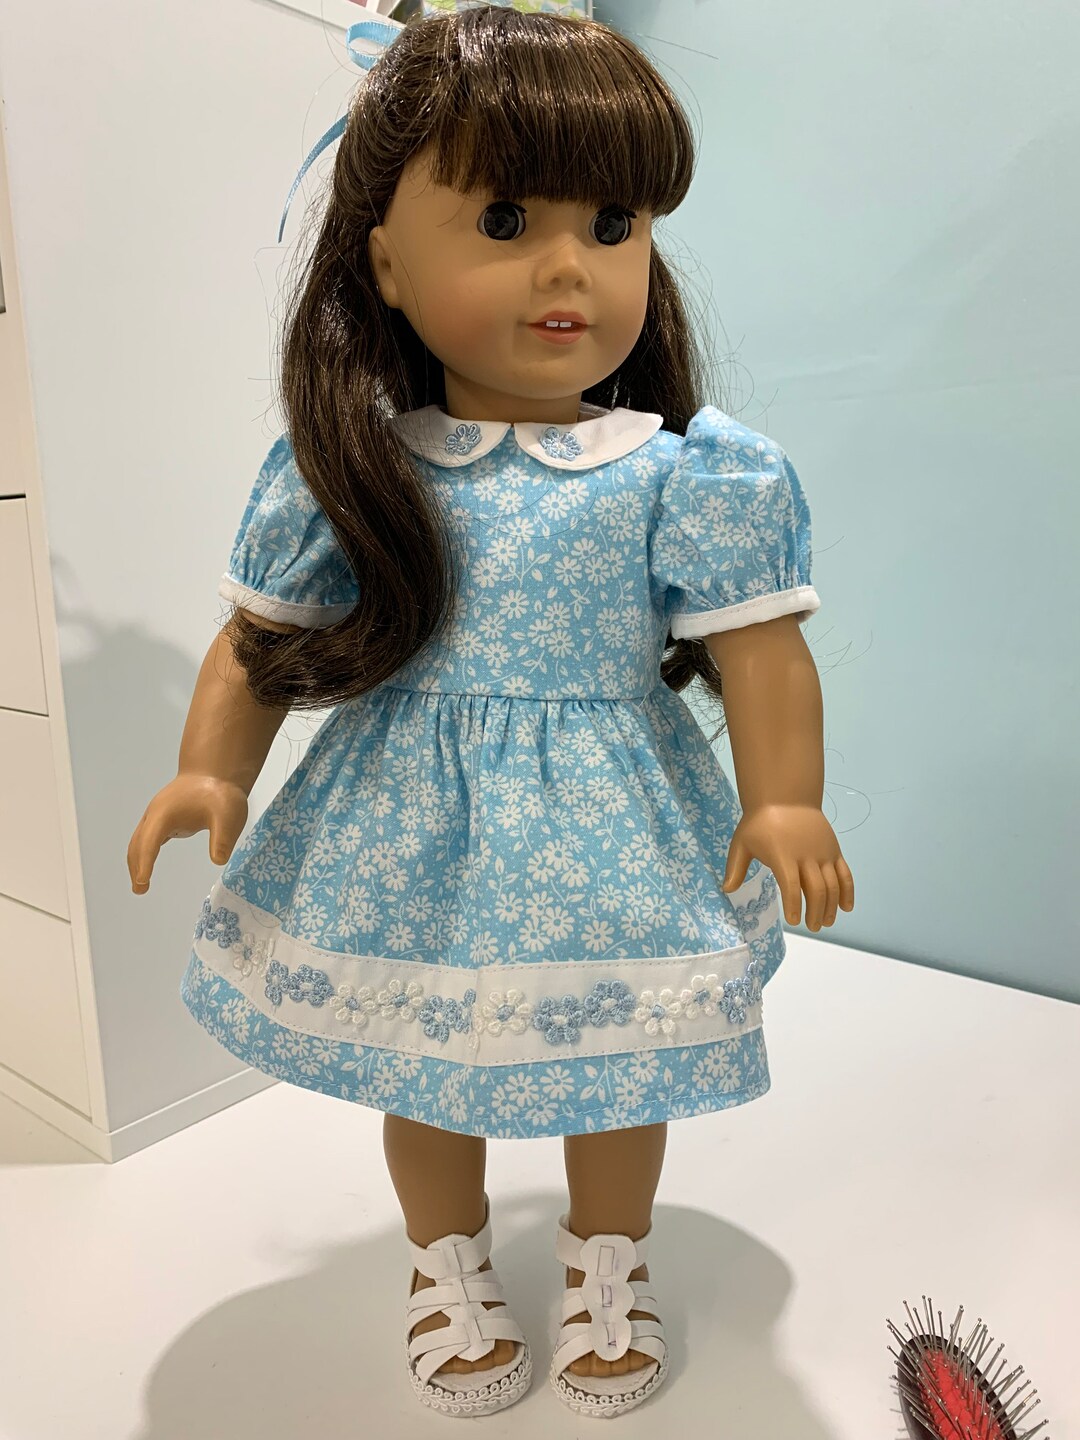 Baby Blue Dress for Your American Girl or 18 Doll - Etsy